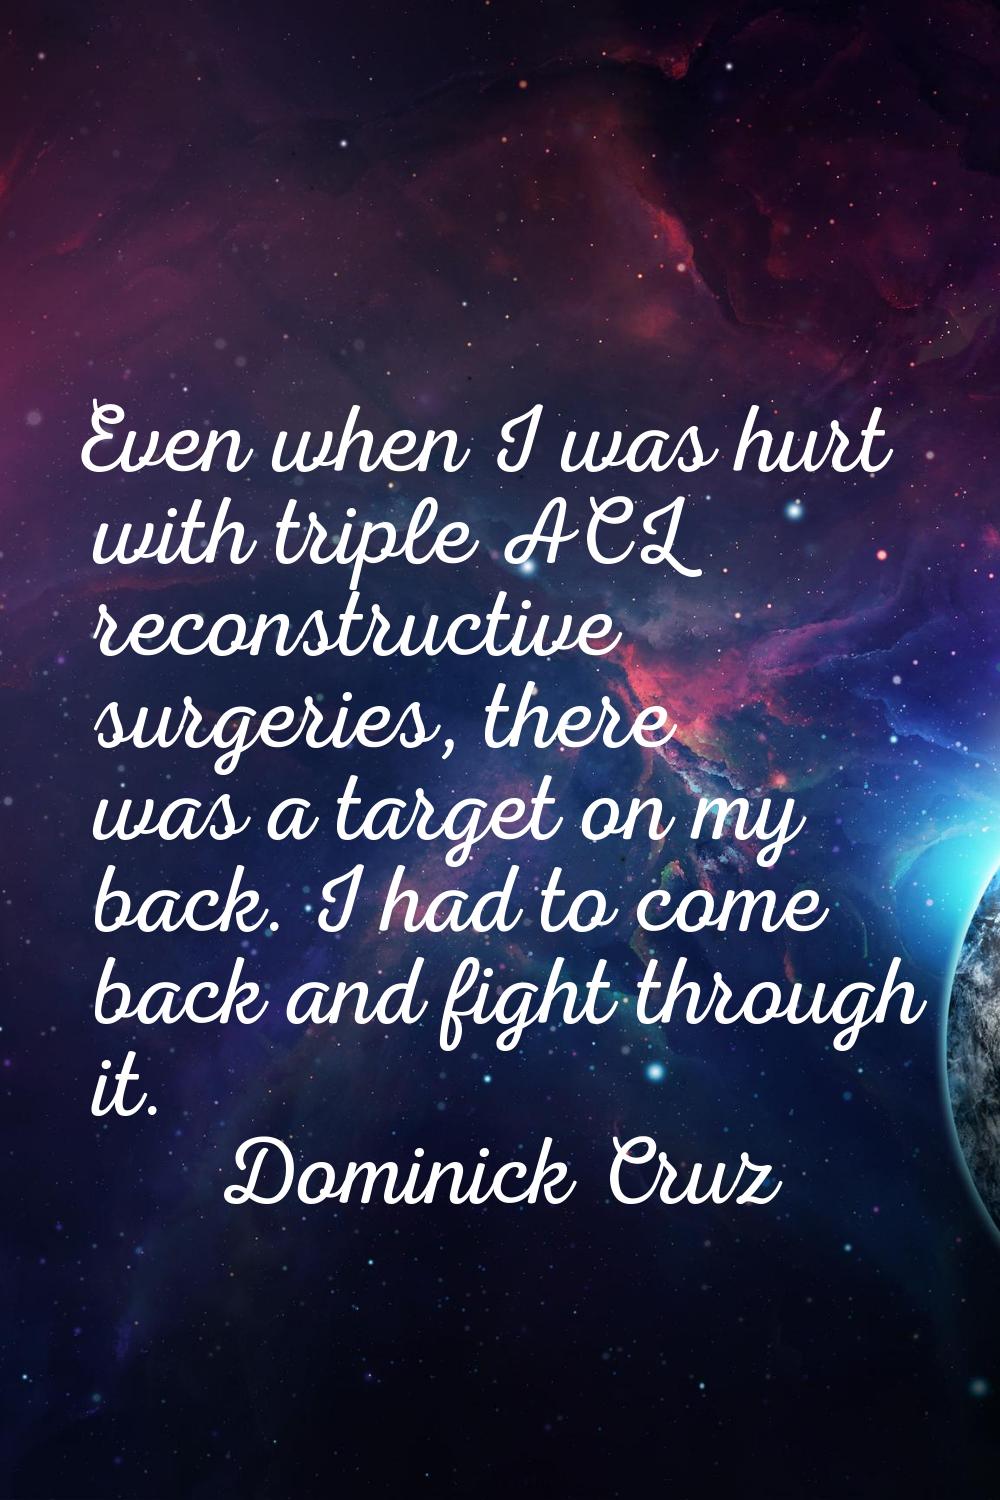 Even when I was hurt with triple ACL reconstructive surgeries, there was a target on my back. I had